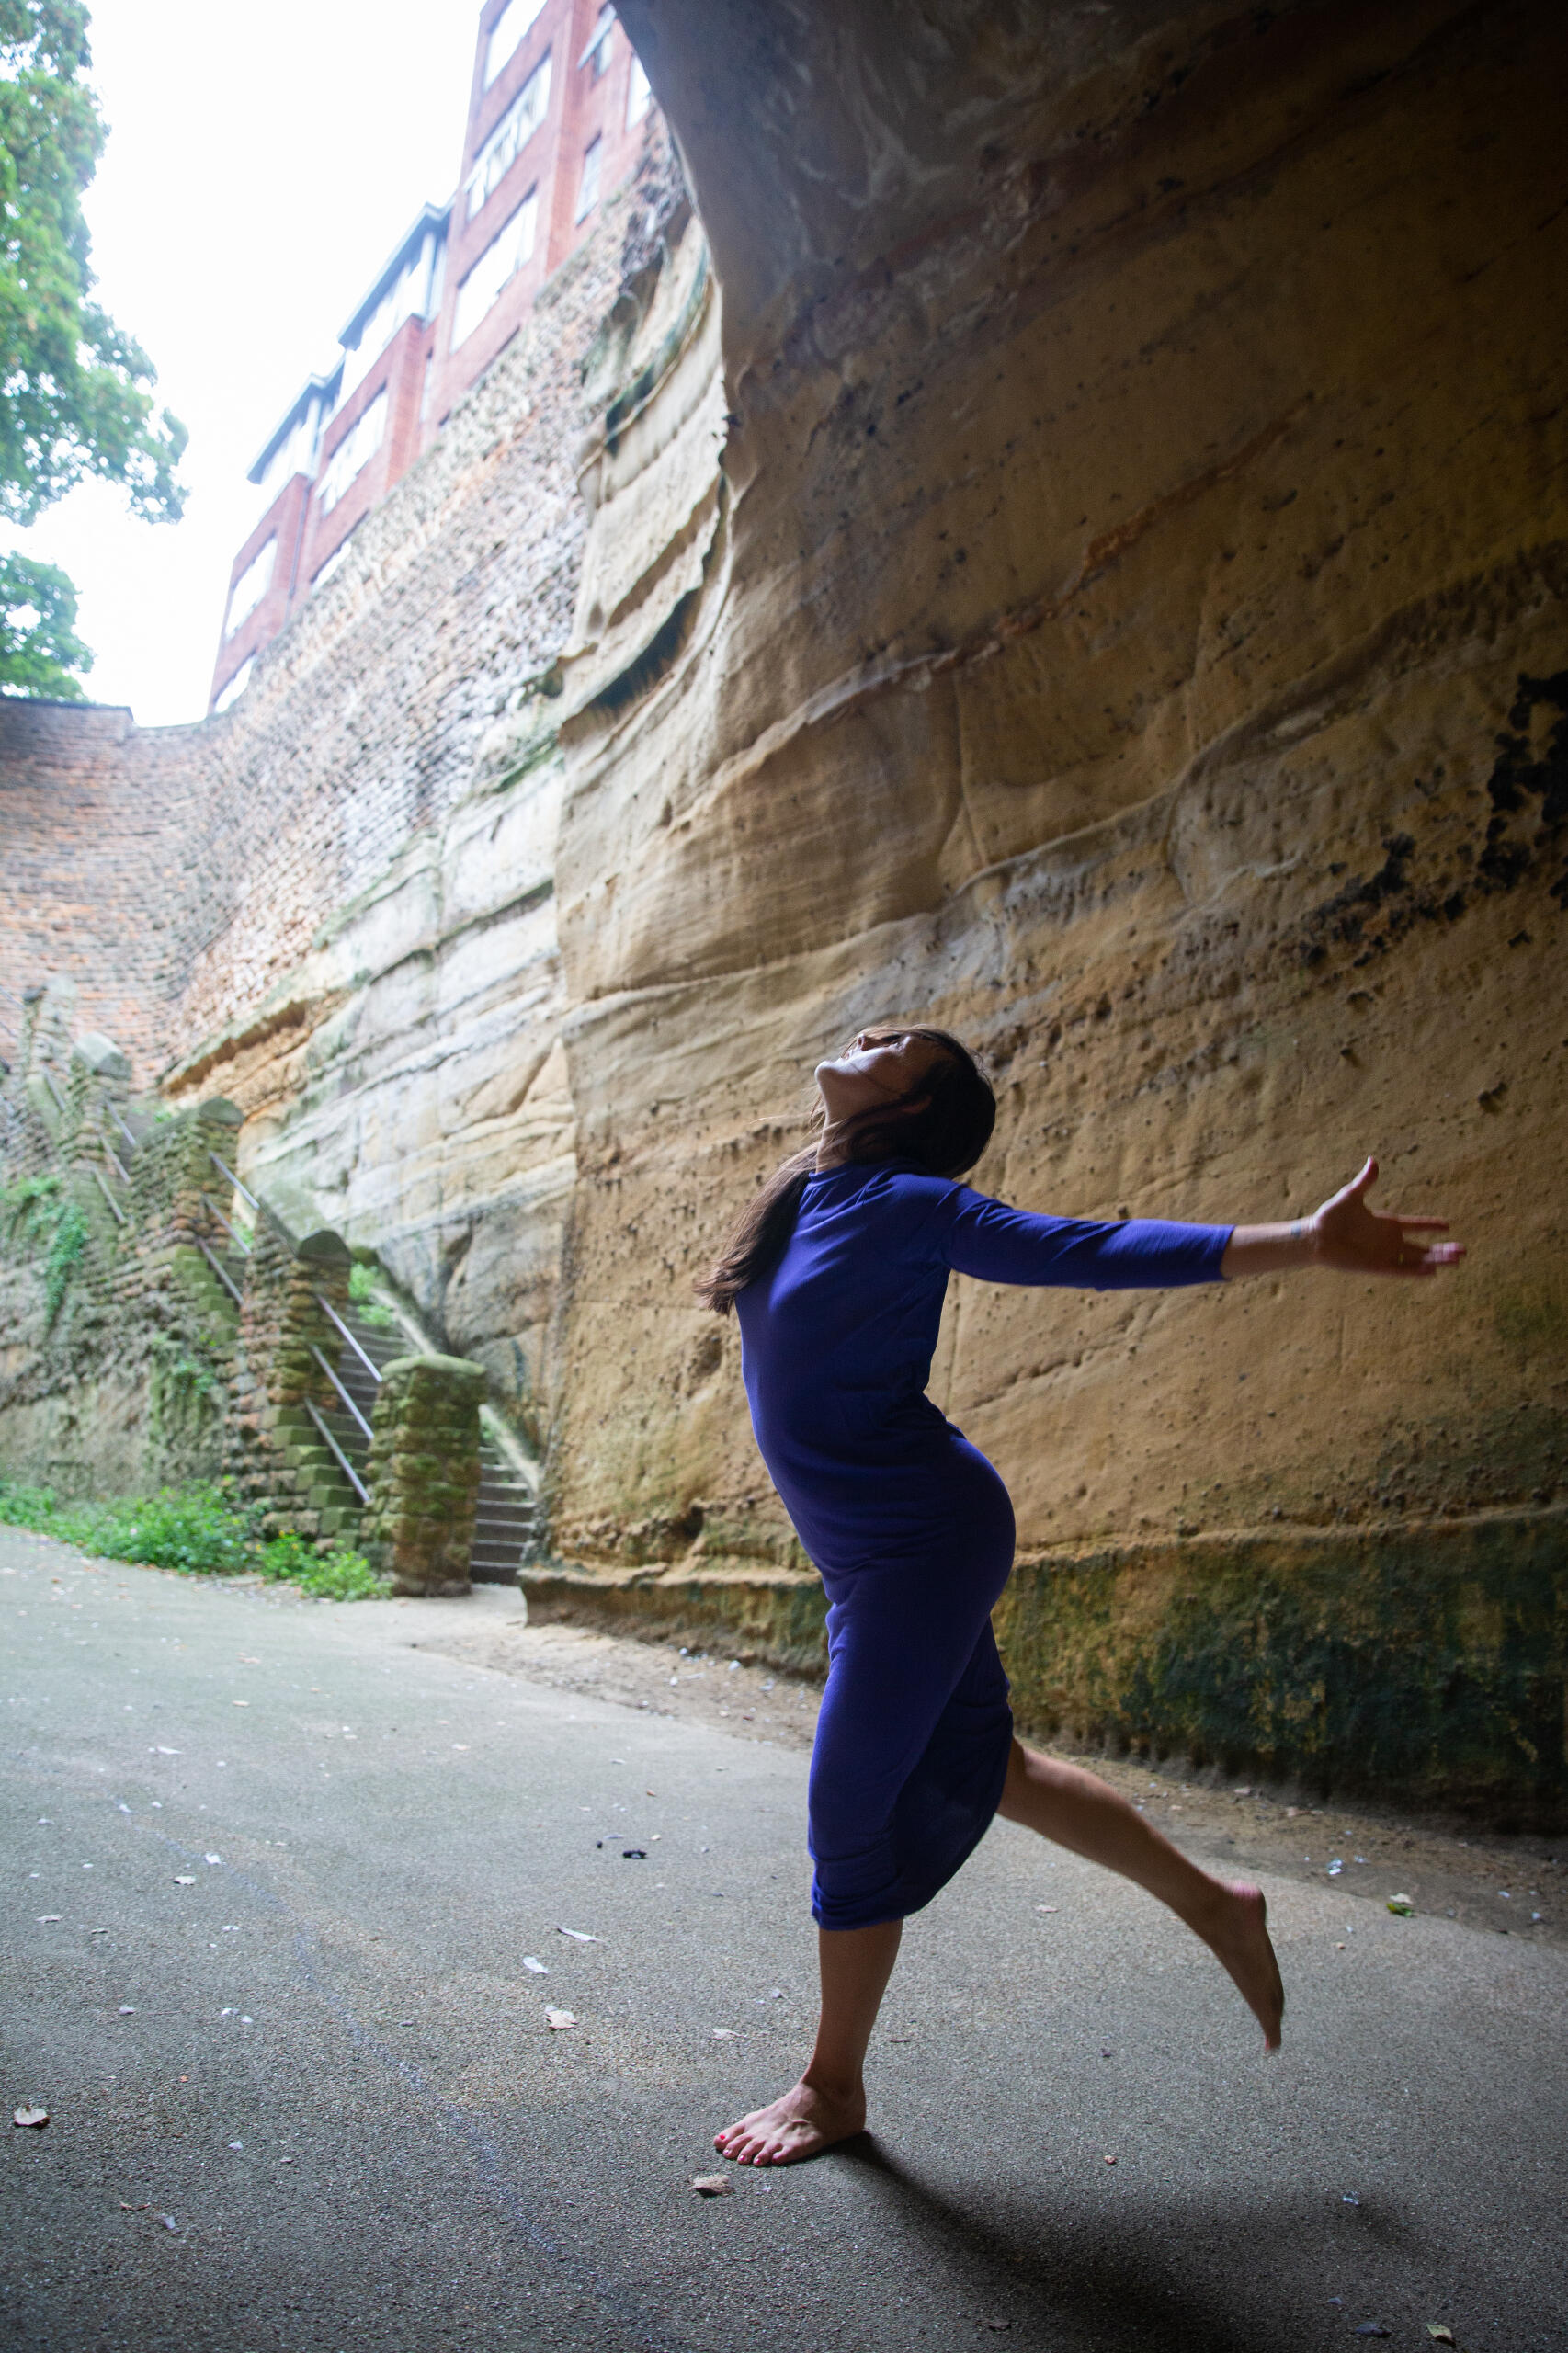 Karla dancing in front of a stone wall